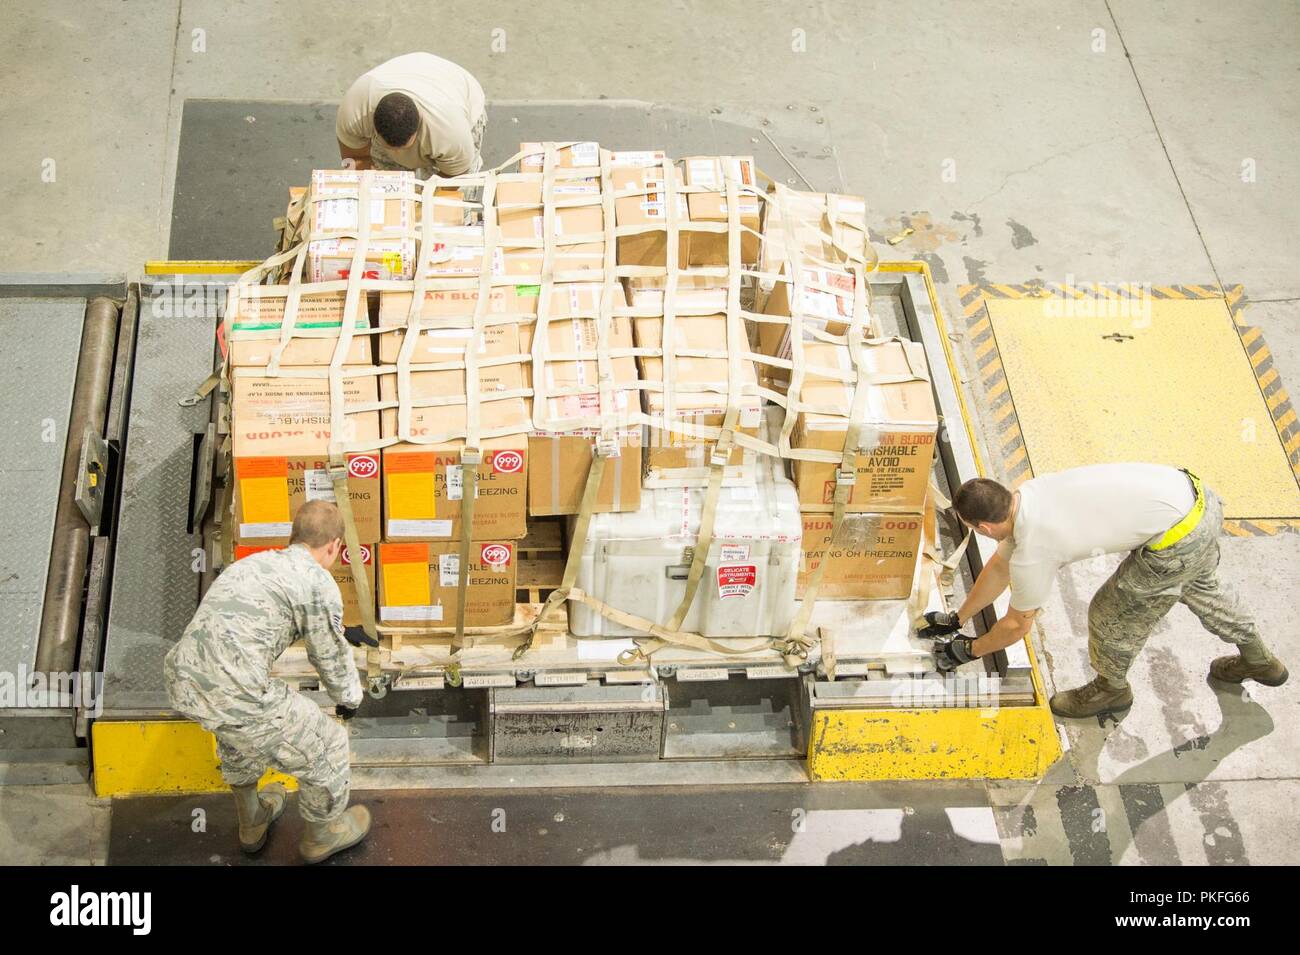 Team Dover Airmen with the 436th Aerial Port Squadron Special Handling section palletize a shipment of blood bound for overseas Aug. 2, 2018, at Dover Air Force Base, Del. The shipment of blood products must reach their overseas destination within 72 hours of being packaged at Joint Base McGuire-Dix-Lakehurst, requiring precise coordination from the various sections involved. Stock Photo